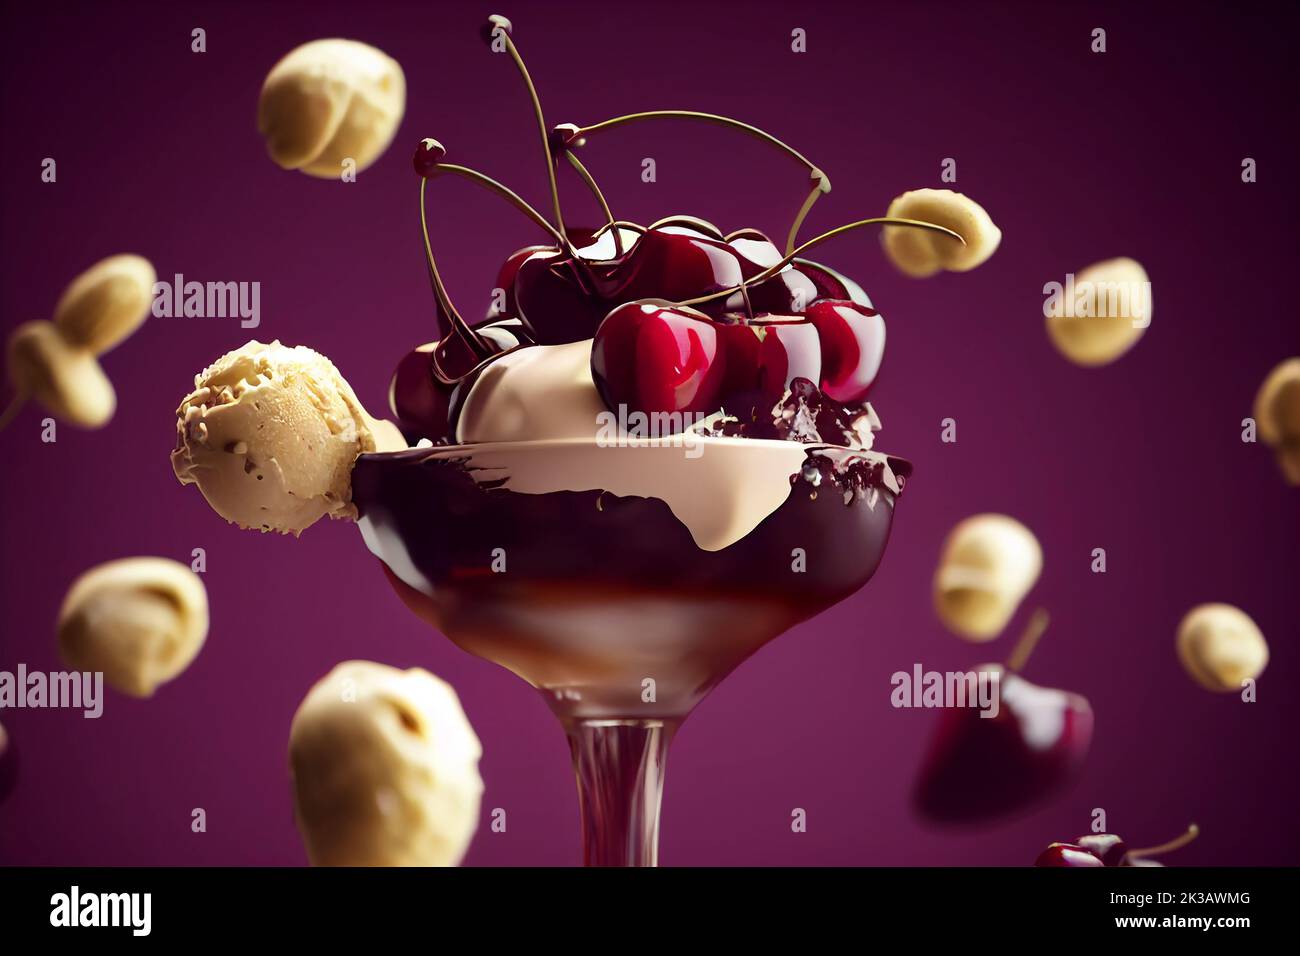 Delicious ice cream sundae with glistening cherries and chocolate syrup in a bowl, food photography and illustration Stock Photo